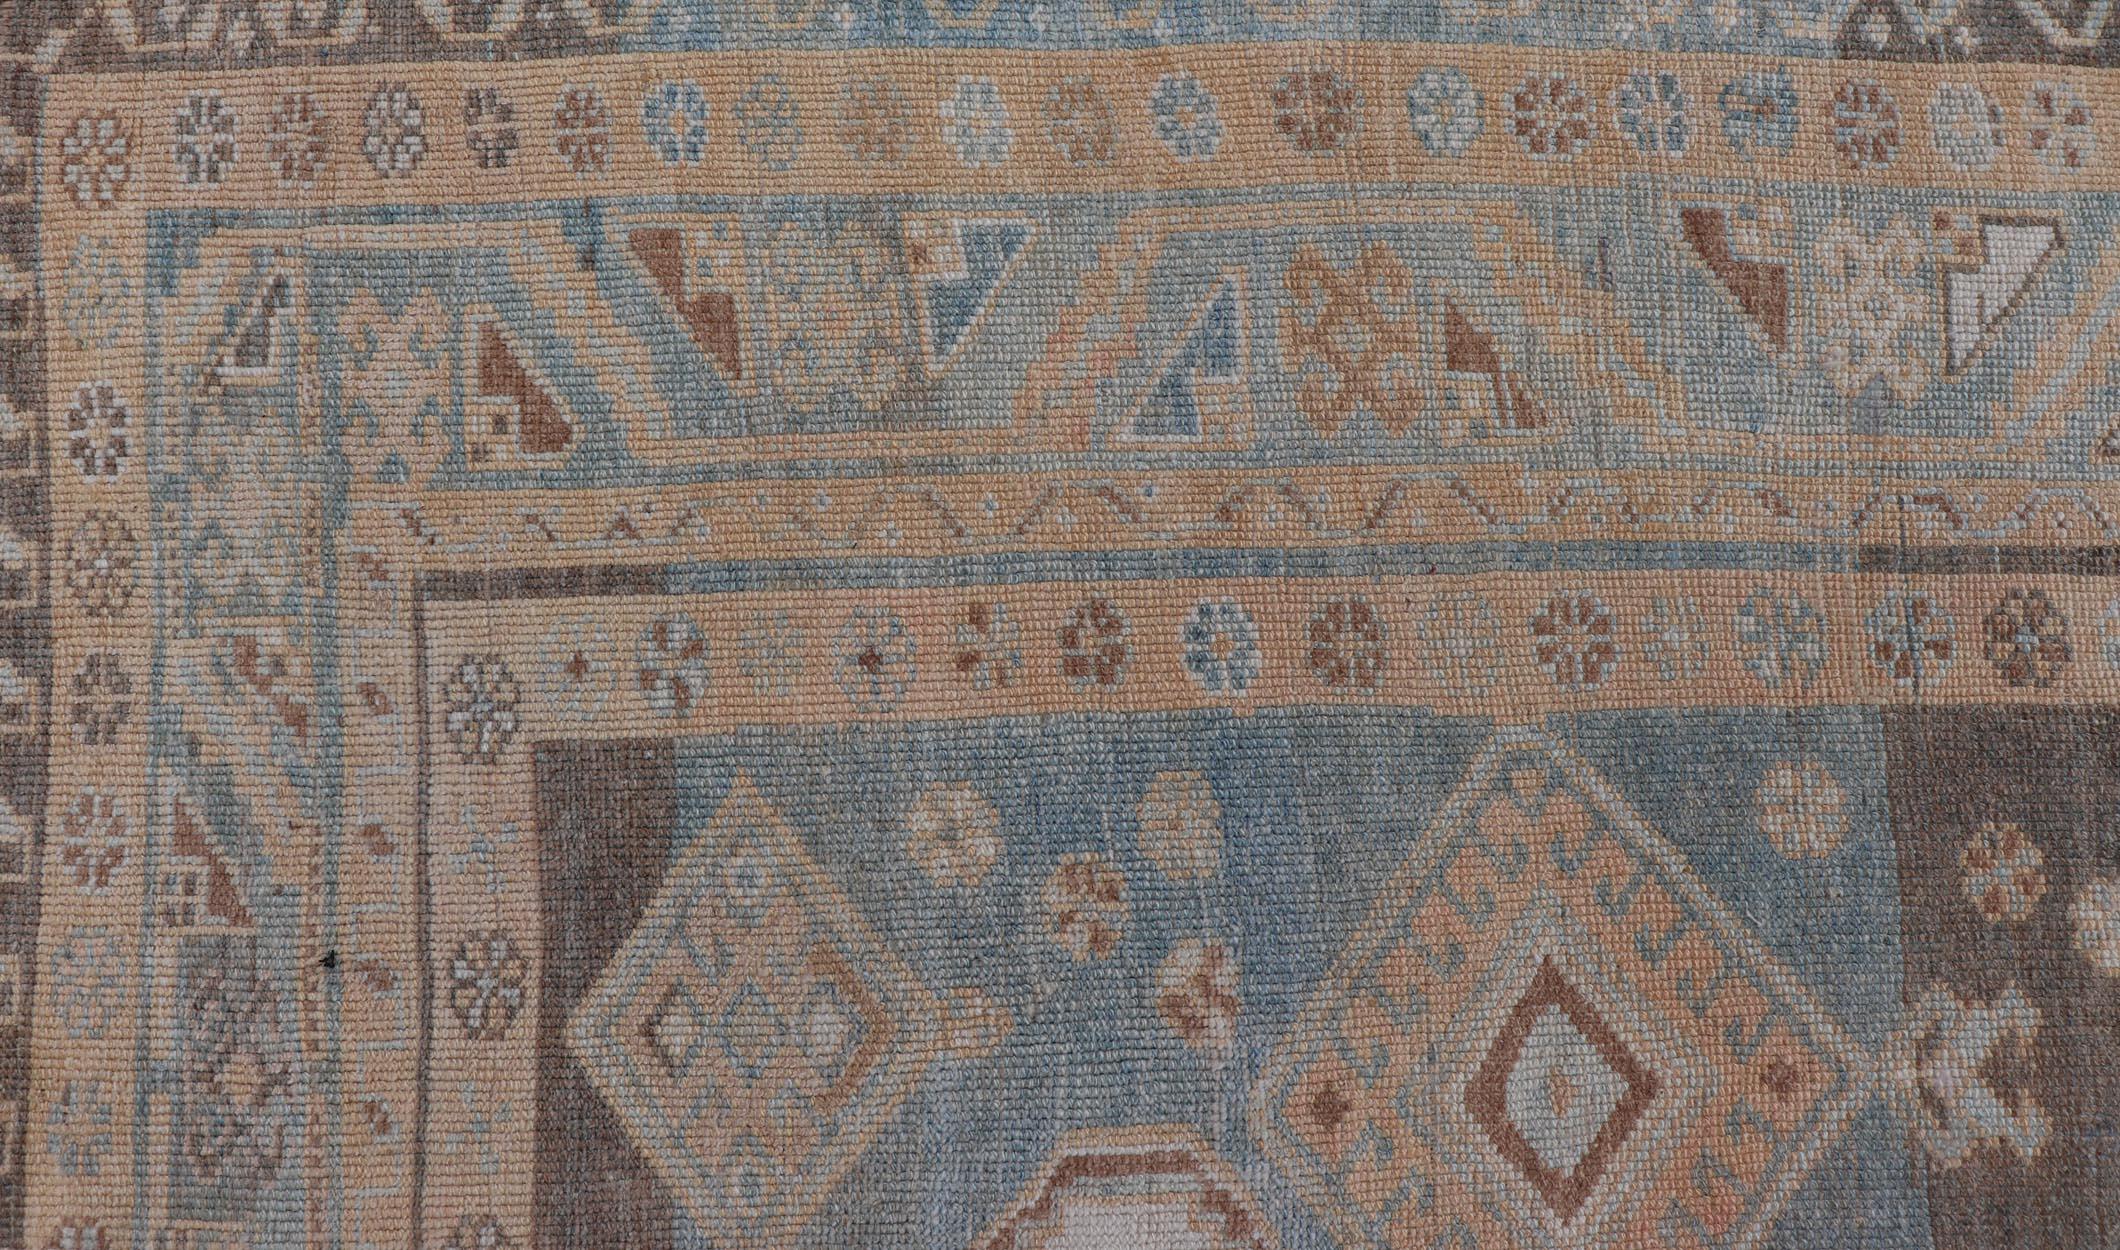 Antique Persian Kurdish Rug with All-Over Tribal in Blue, Green, and Brown For Sale 4